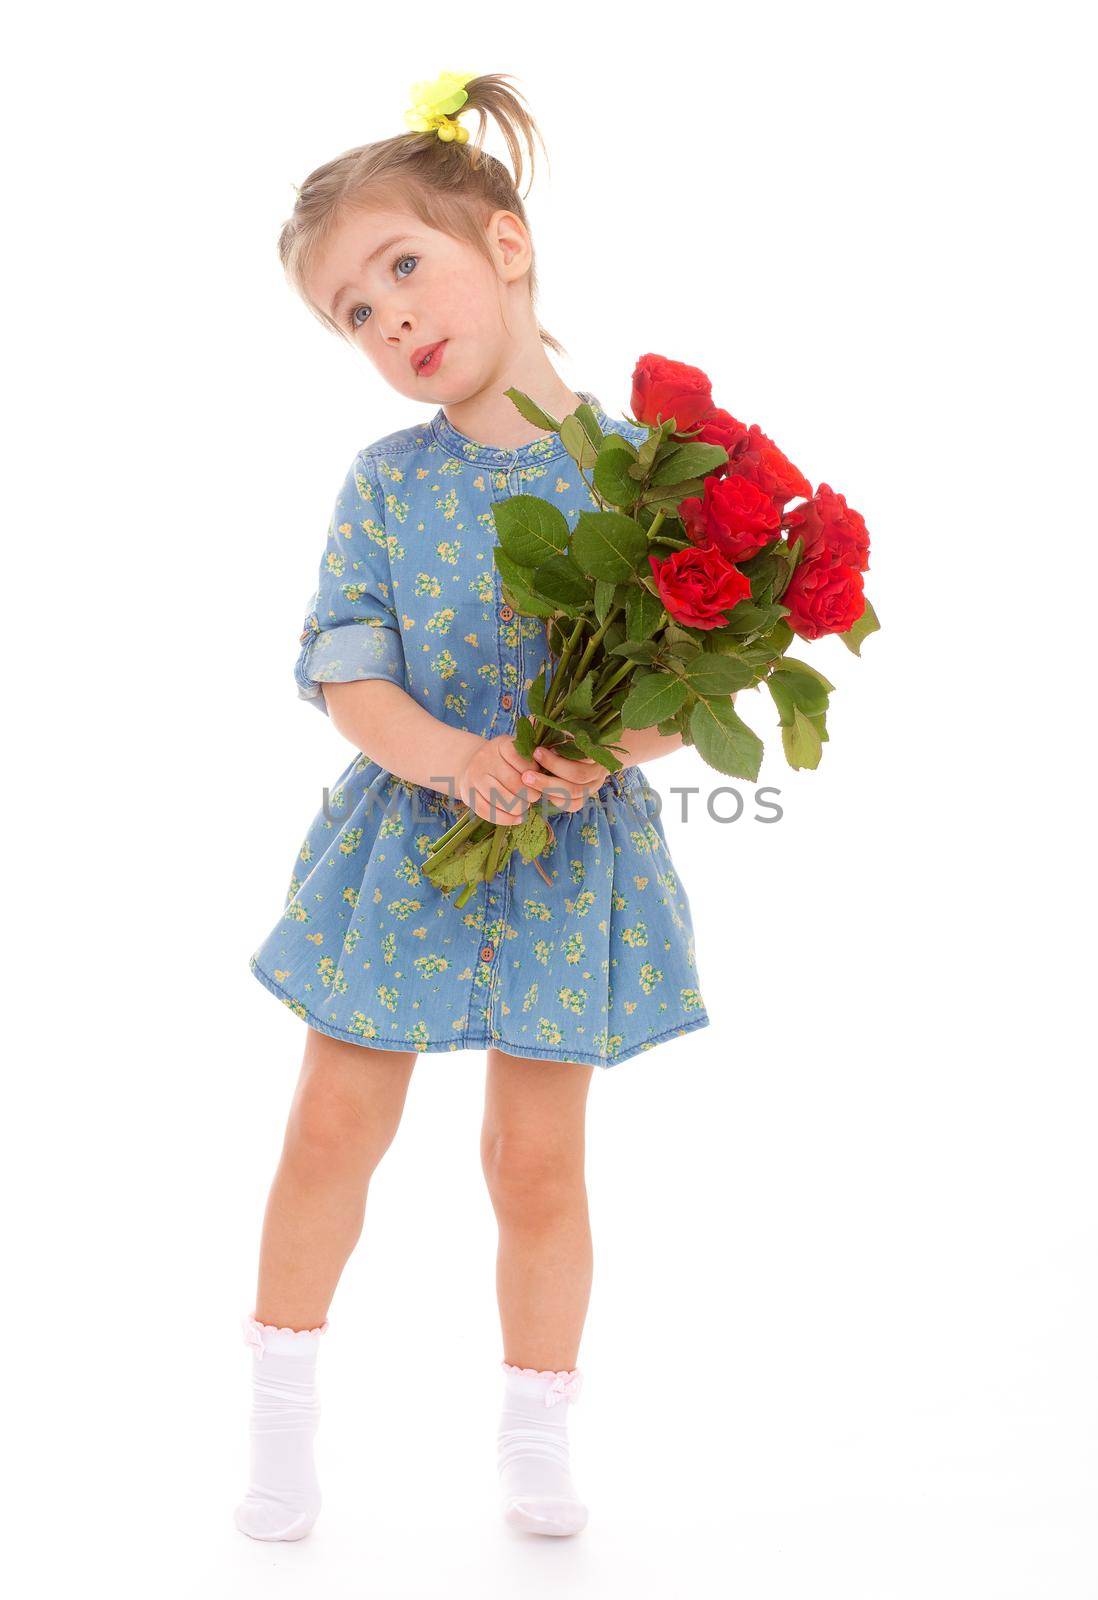 Charming girl in blue dress with a bouquet of red roses